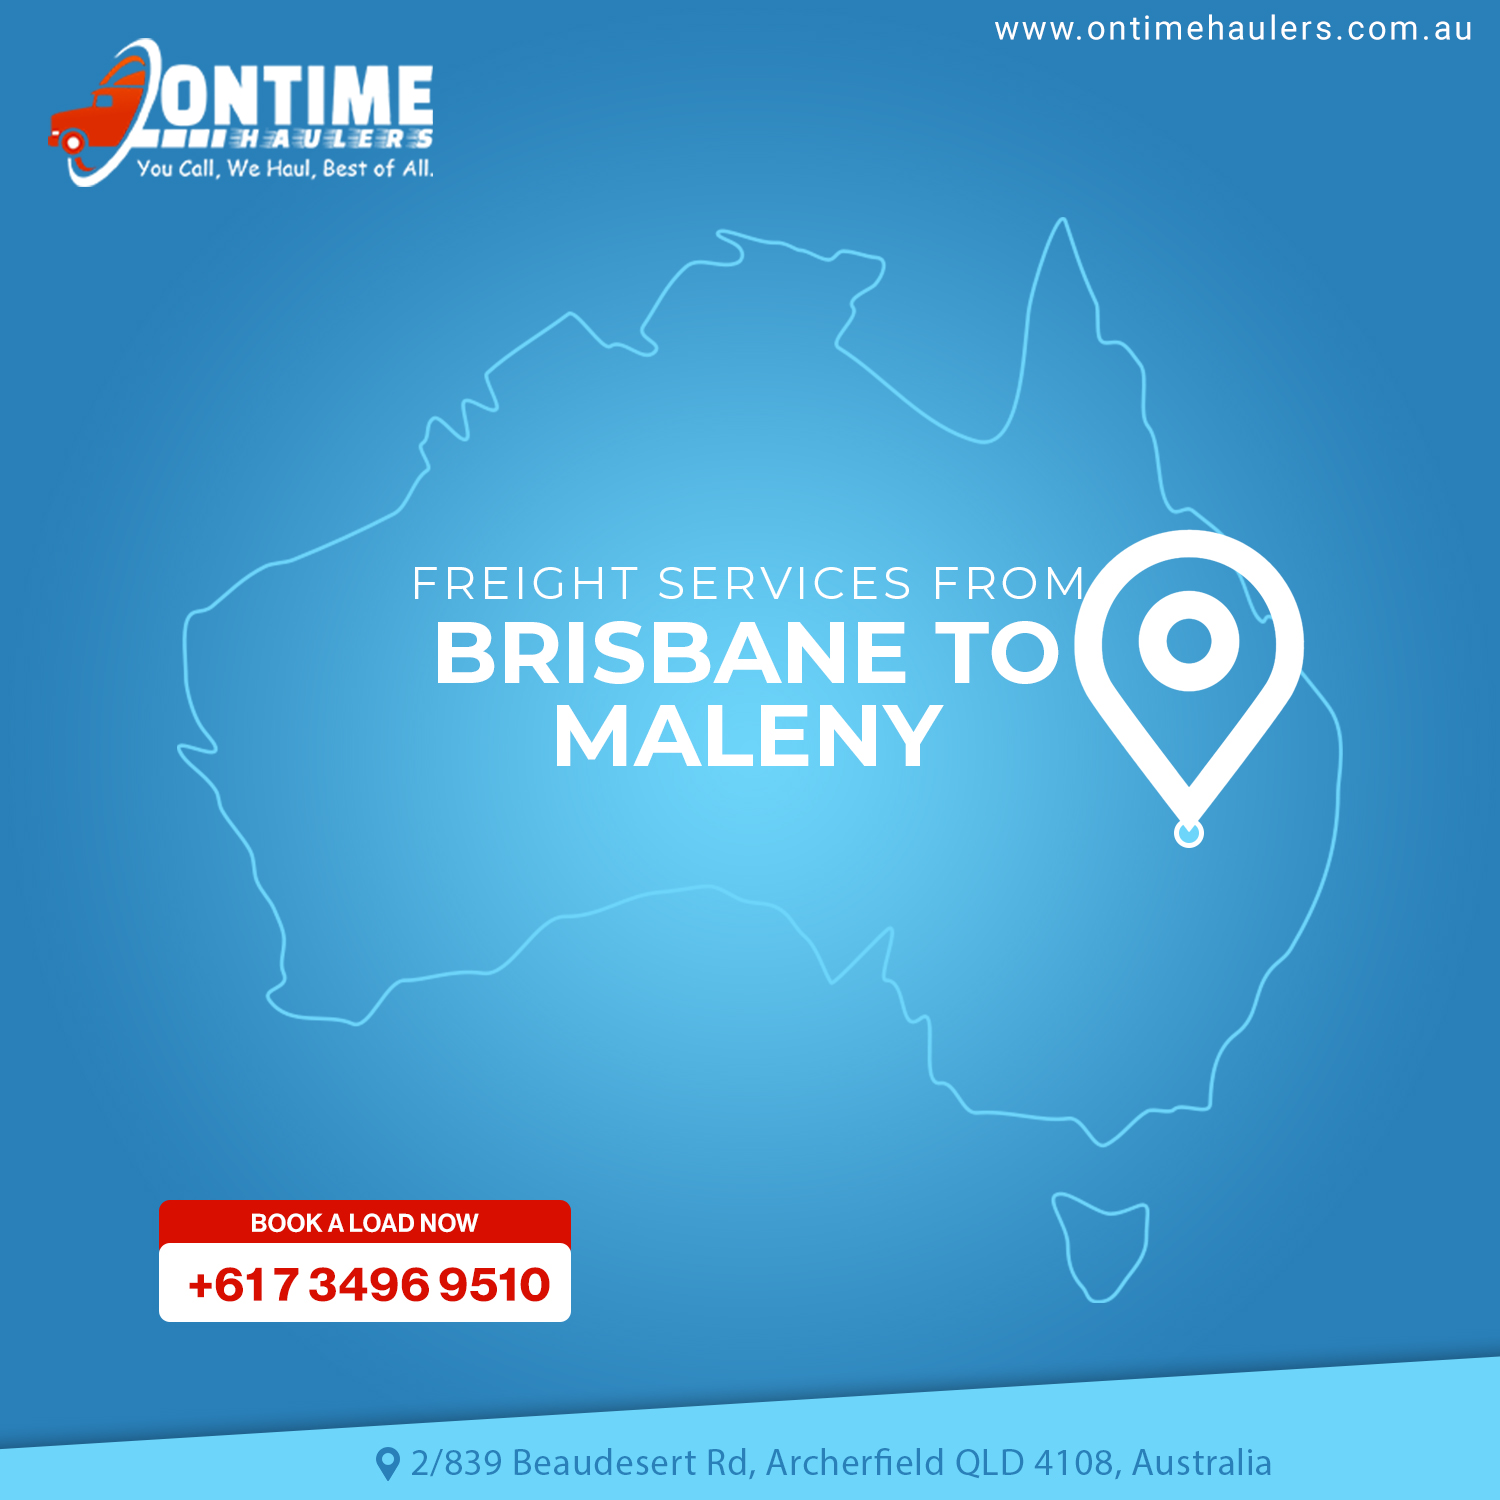 Send a parcel from Brisbane to Maleny